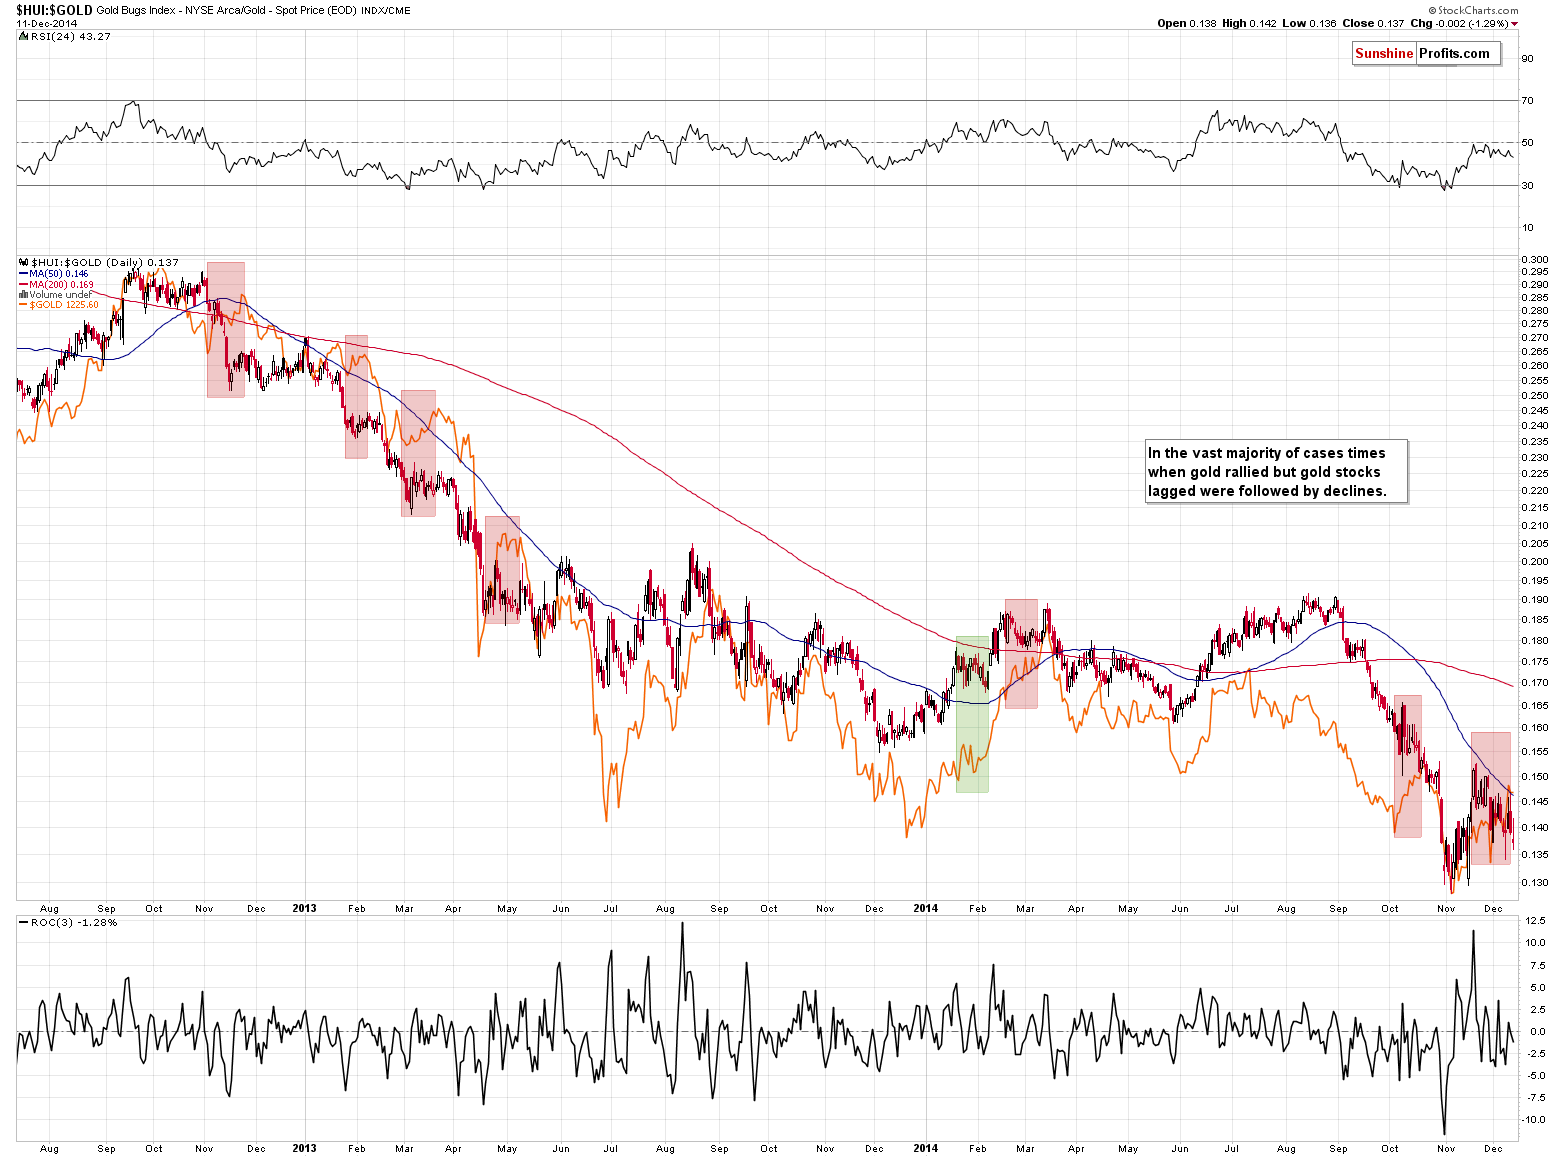 HUI:GOLD - Gold stocks to gold ratio chart